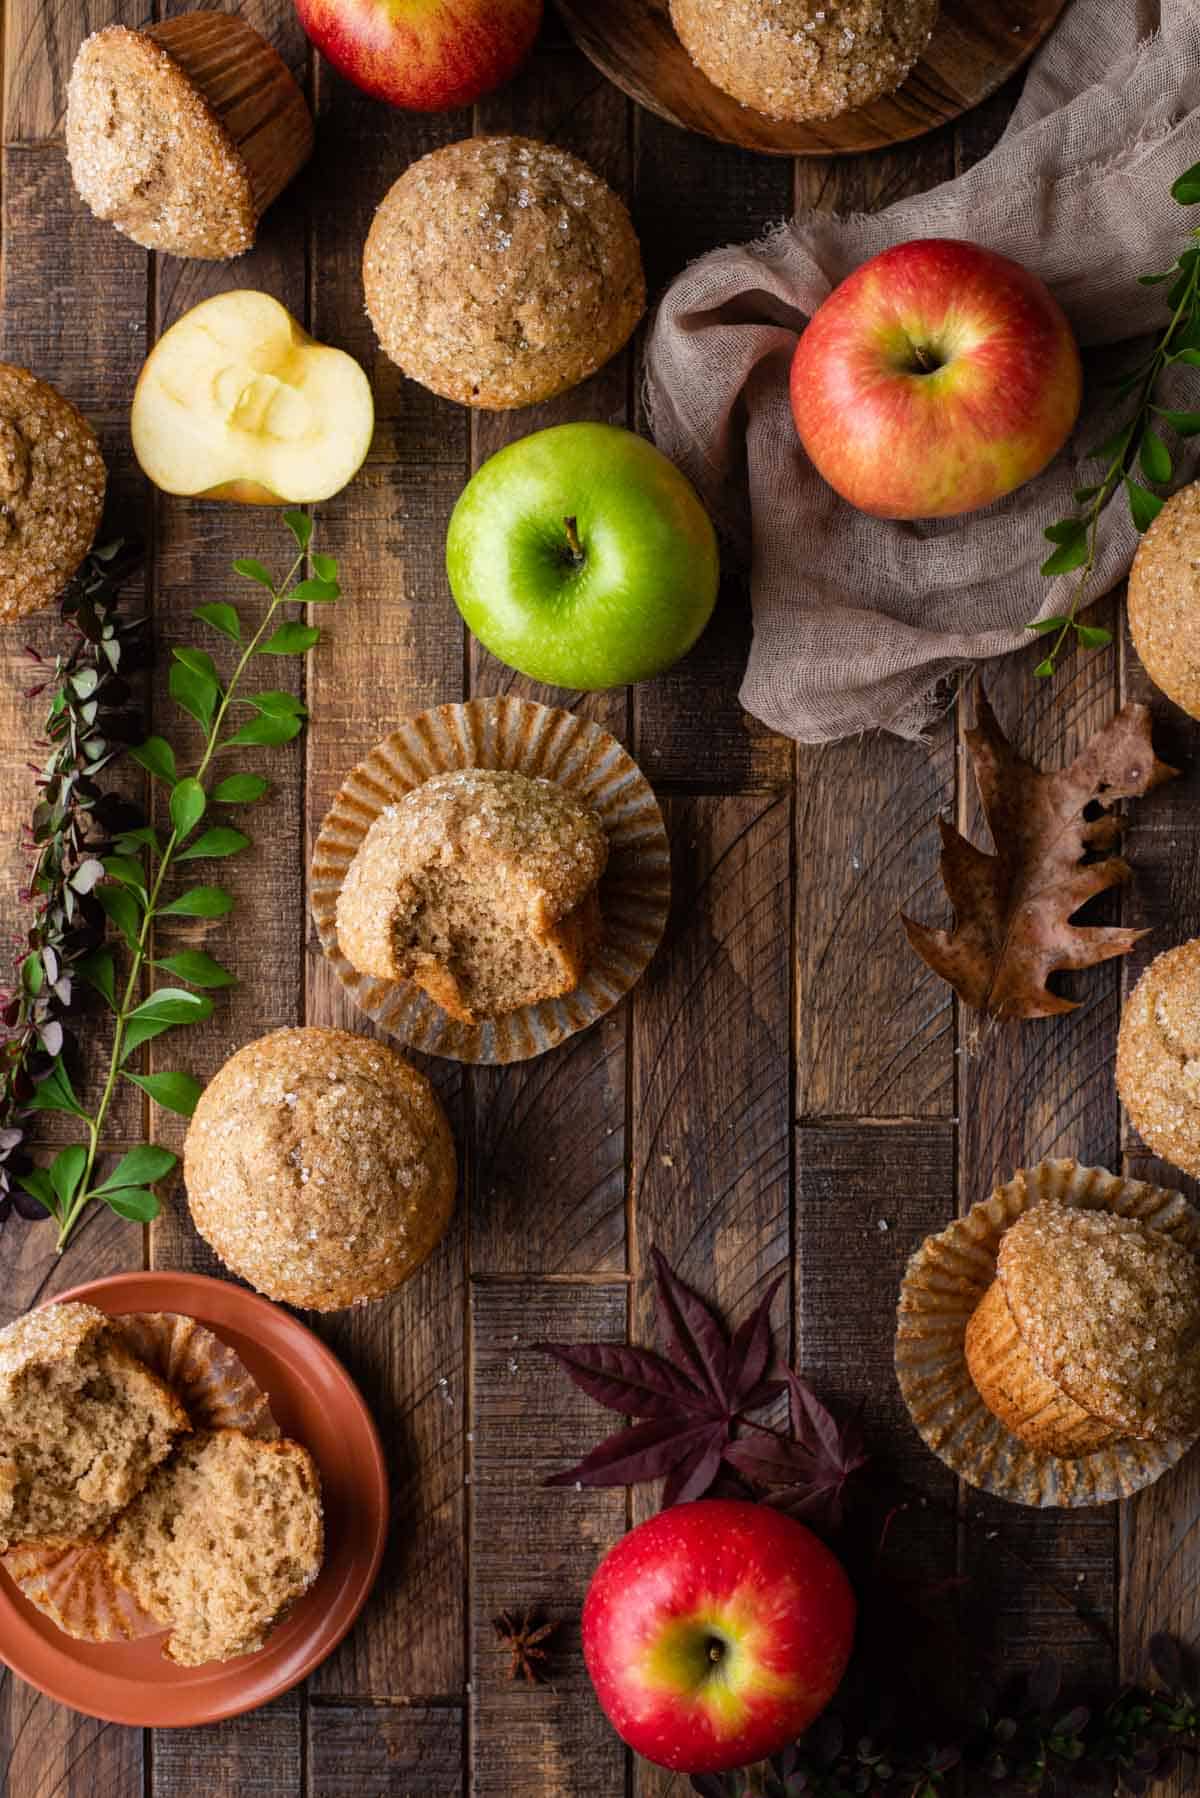 applesauce muffins arranged on wood background with apples and fall foliage 